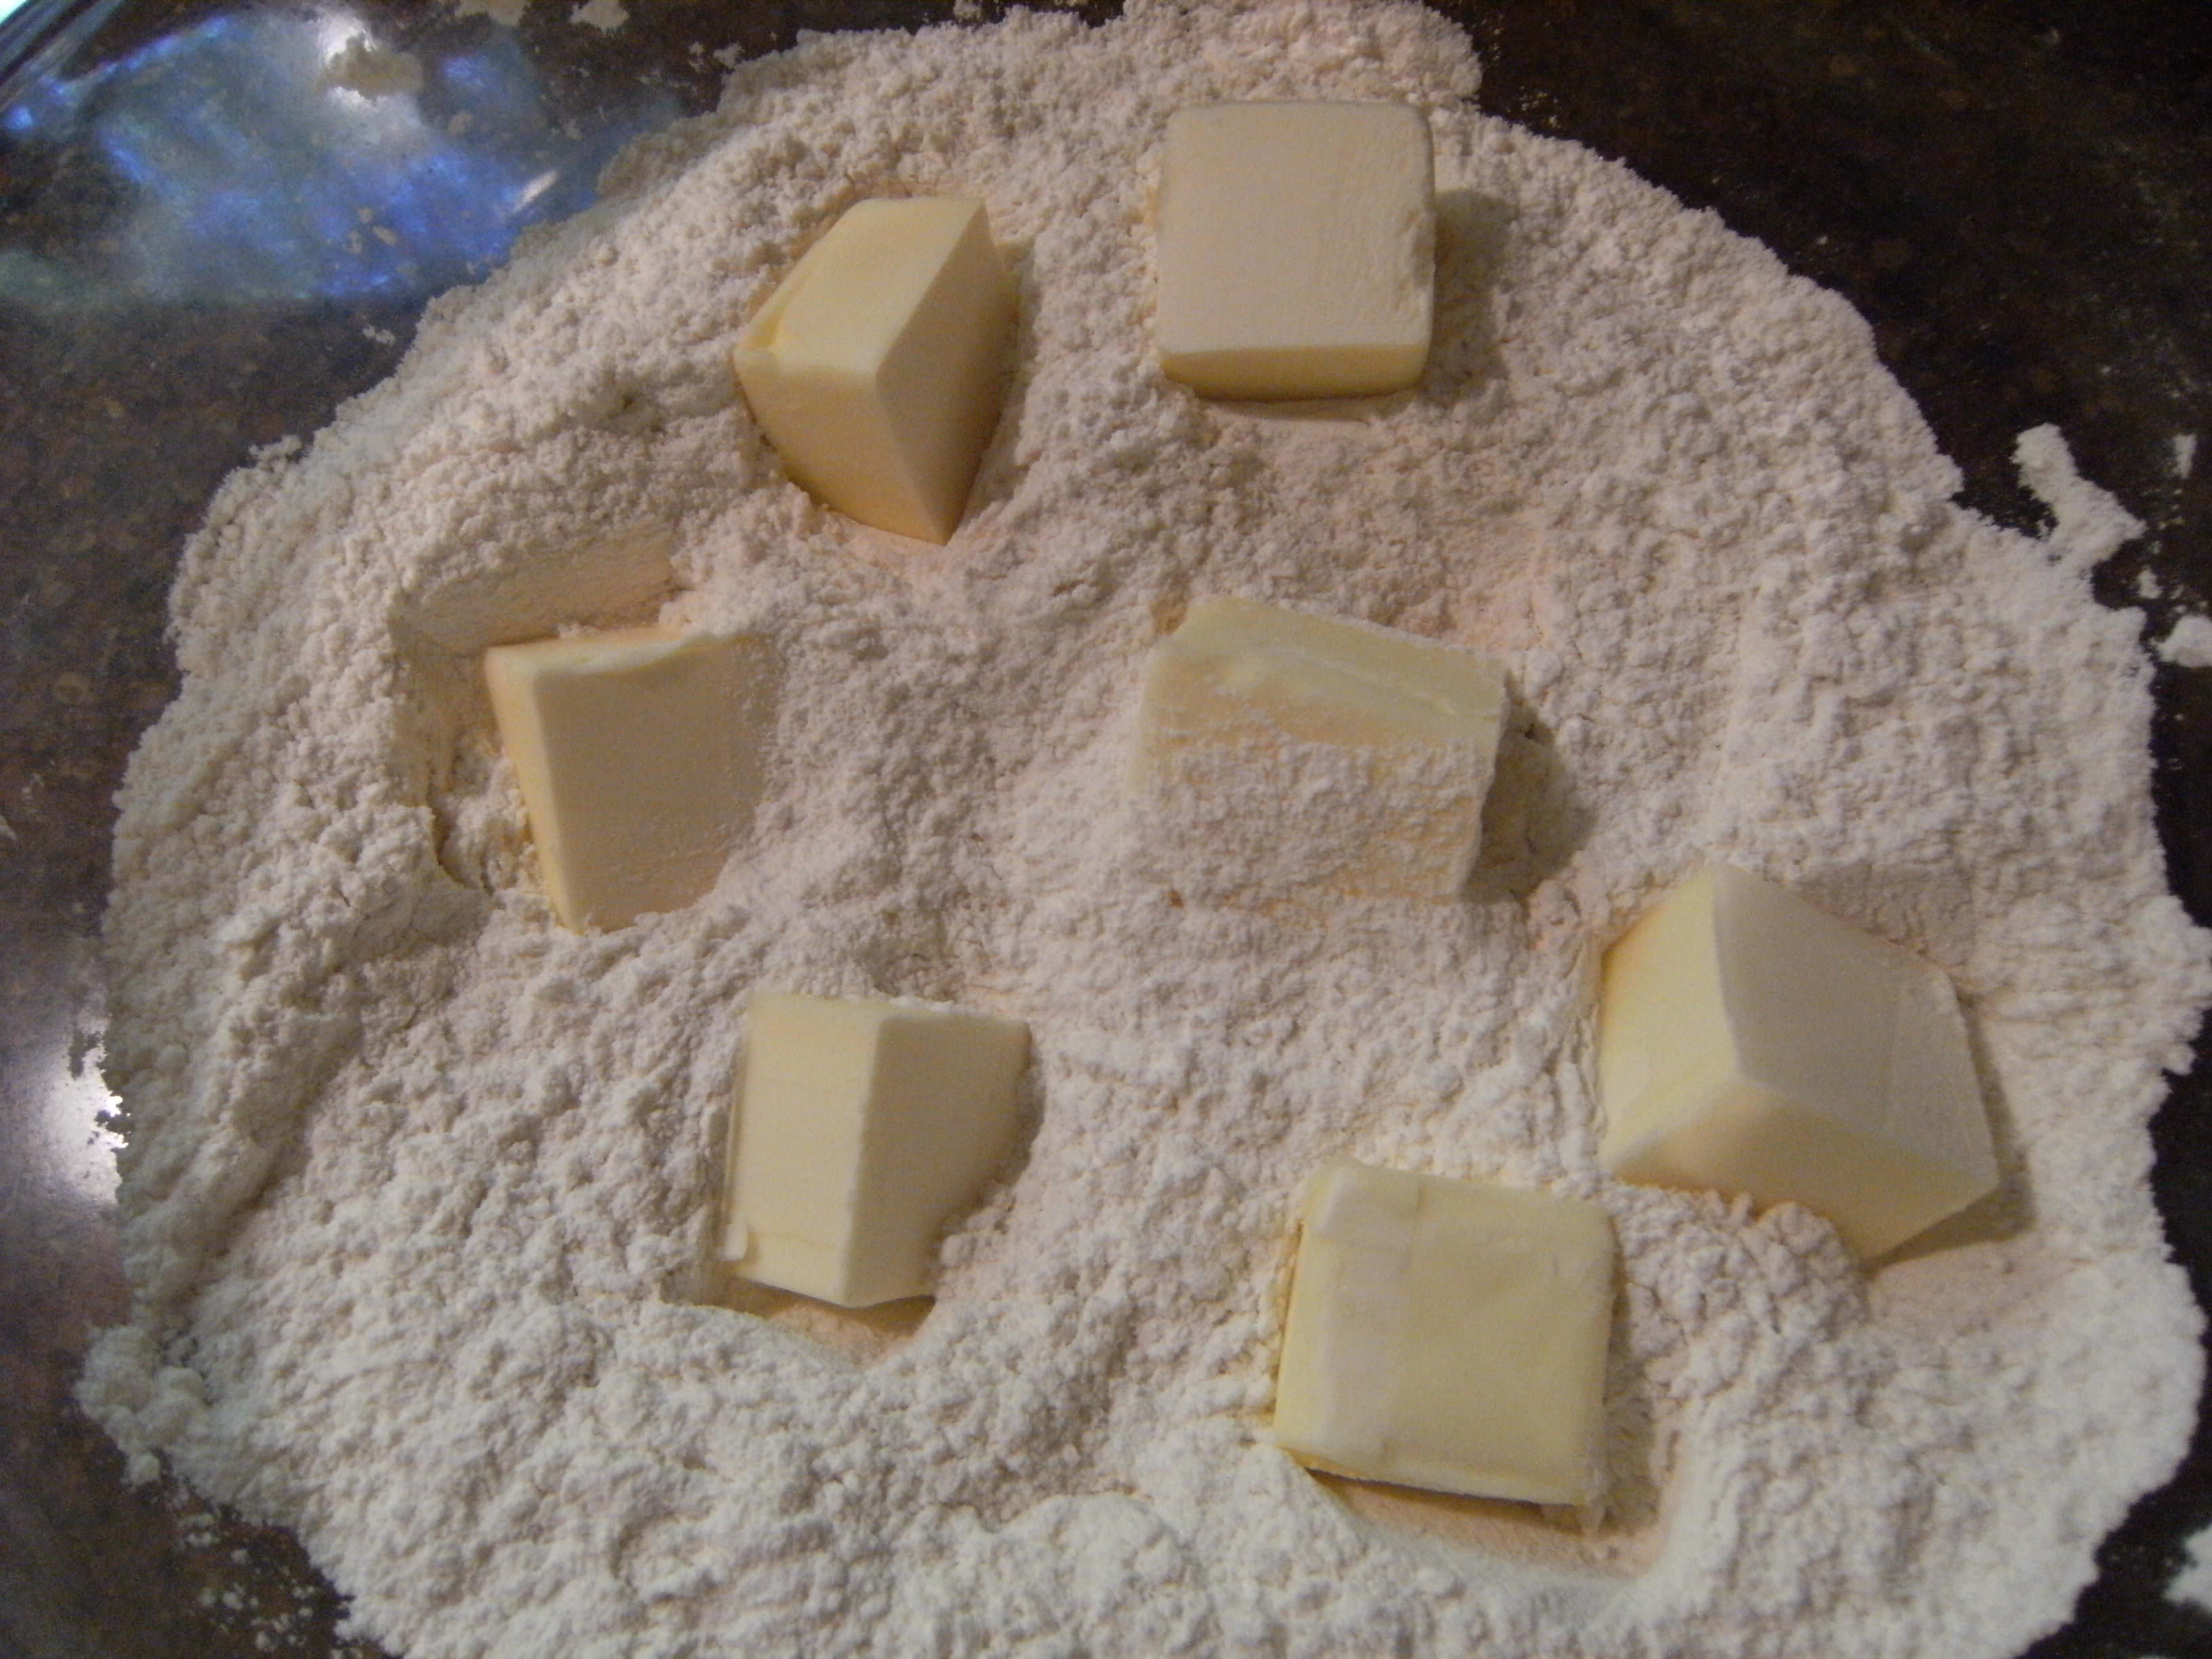 incorporating butter into dry ingredients for homemade biscuits